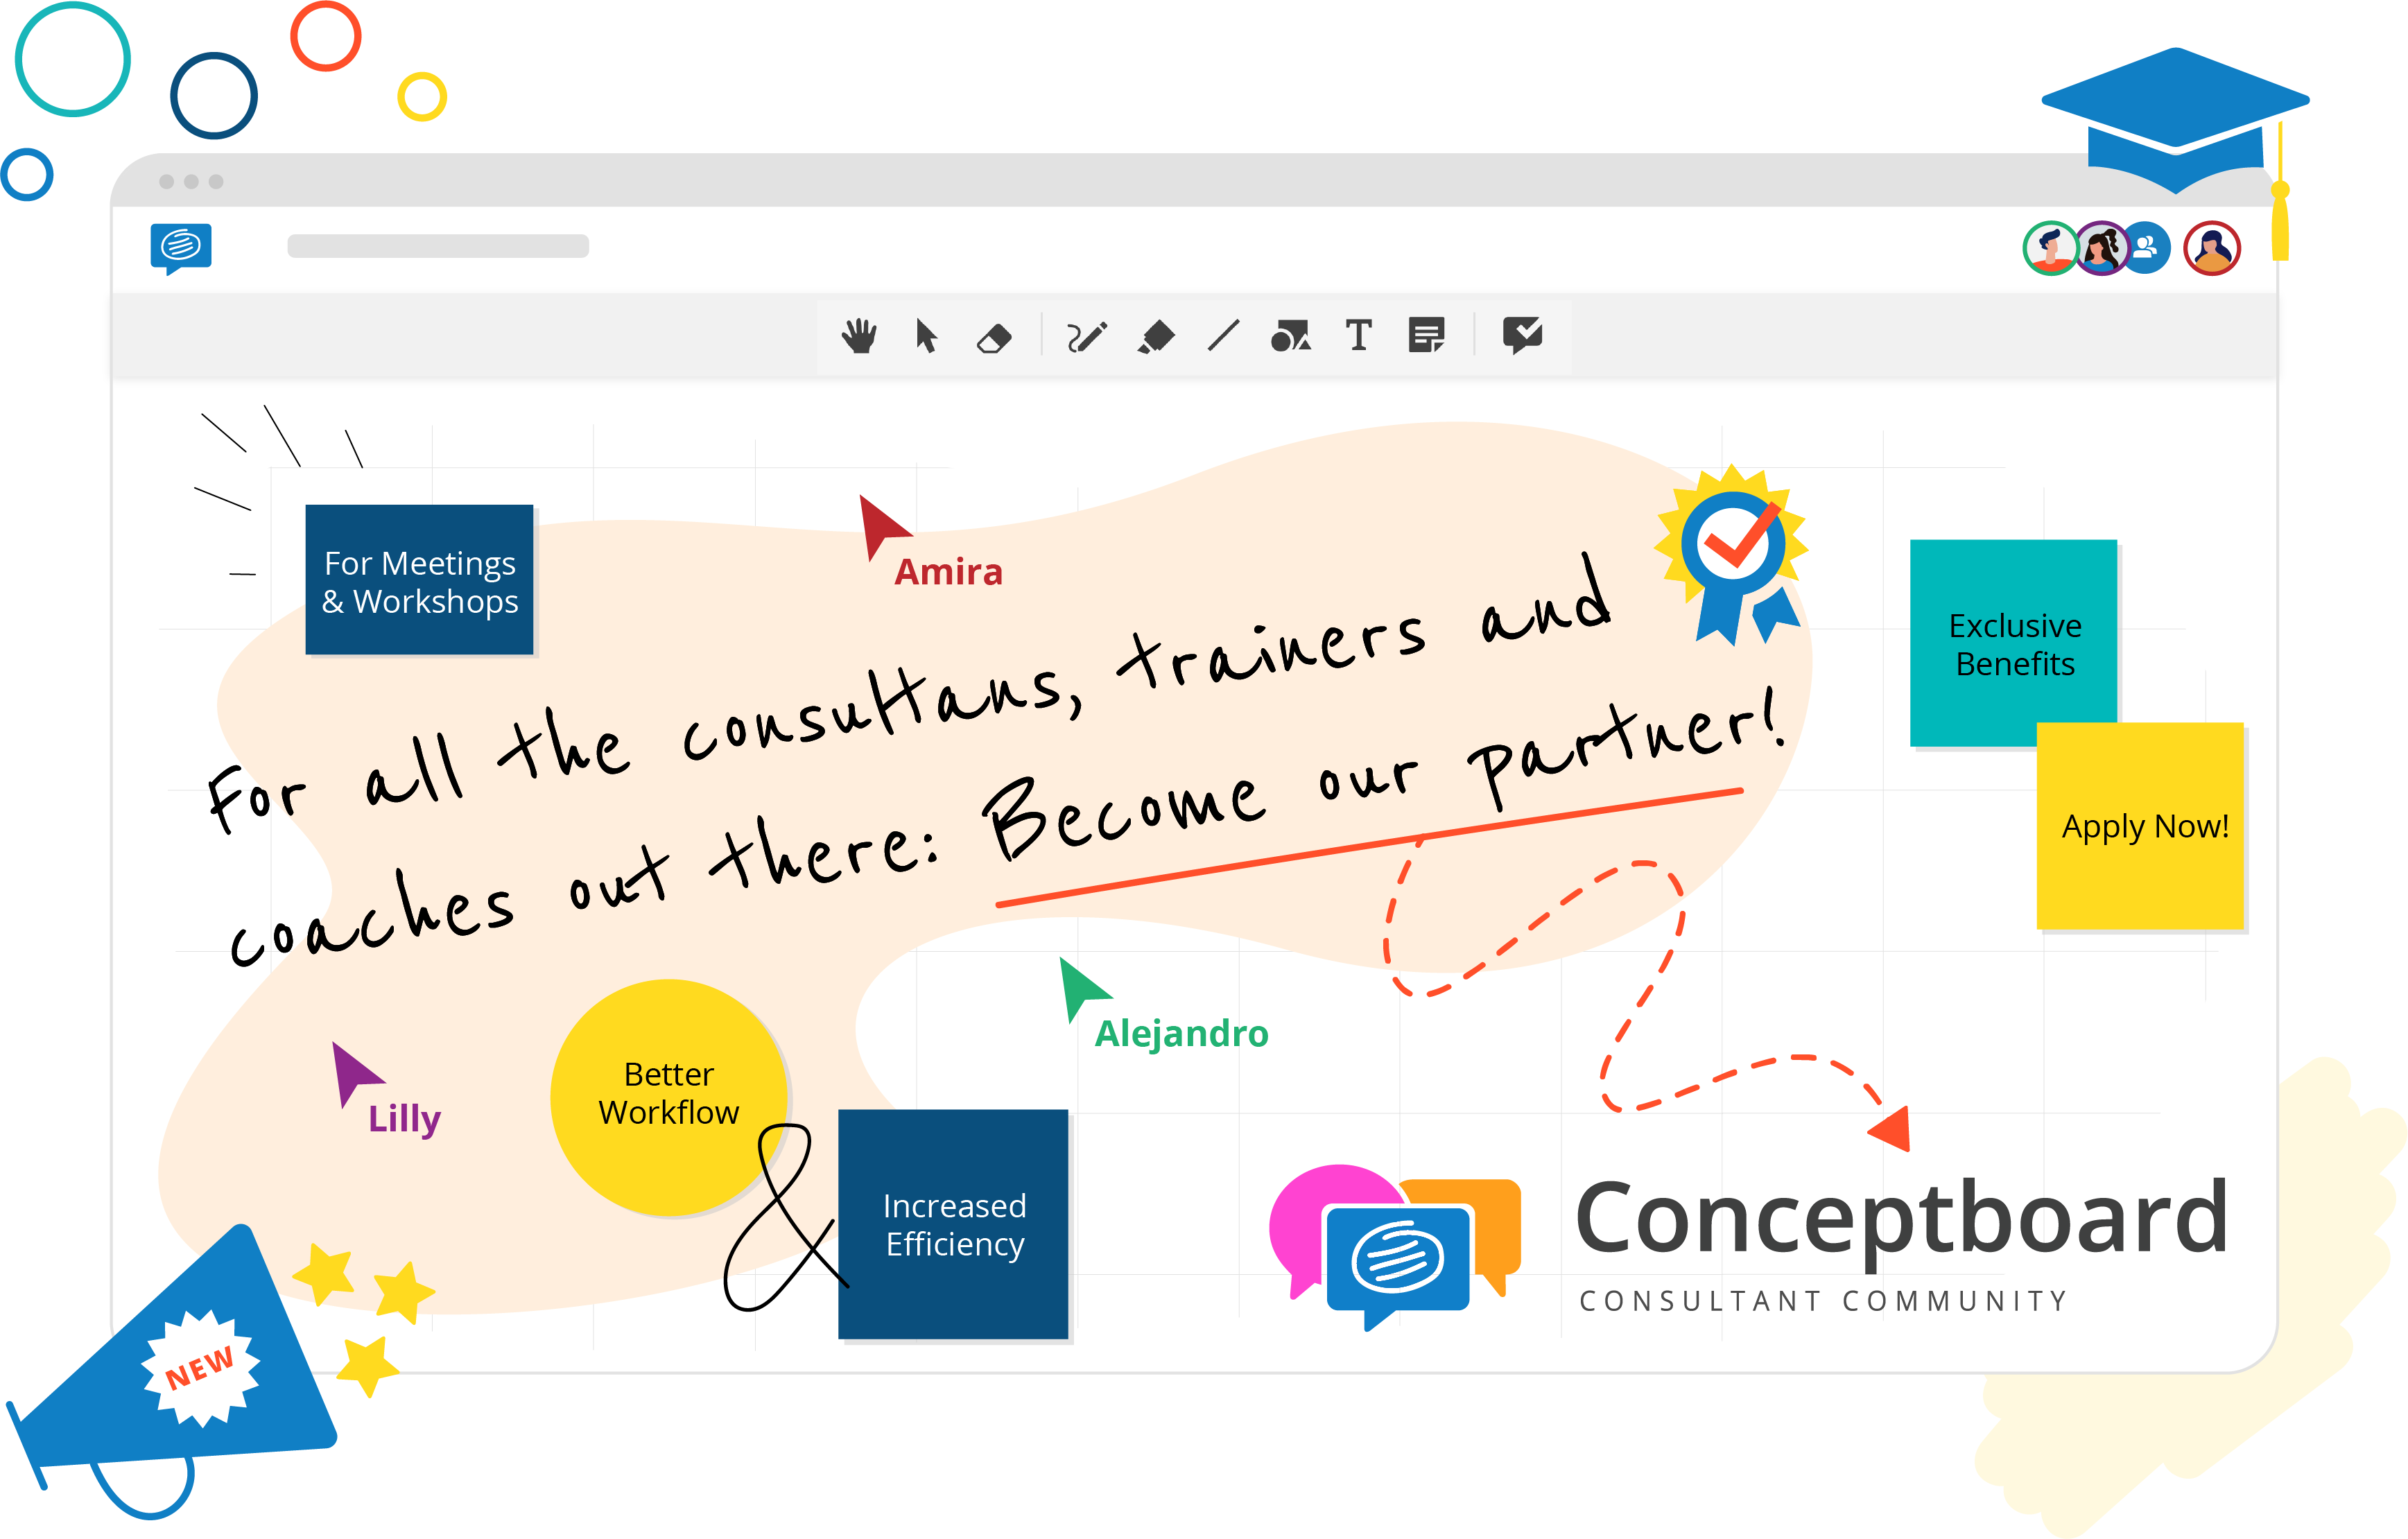 Conceptboard Consultant Community header with a board represented on it, with cursors, sticky notes, arrows, symbols and a text which says: 'For all the consultants, trainers and coaches out there: Become our partner!''